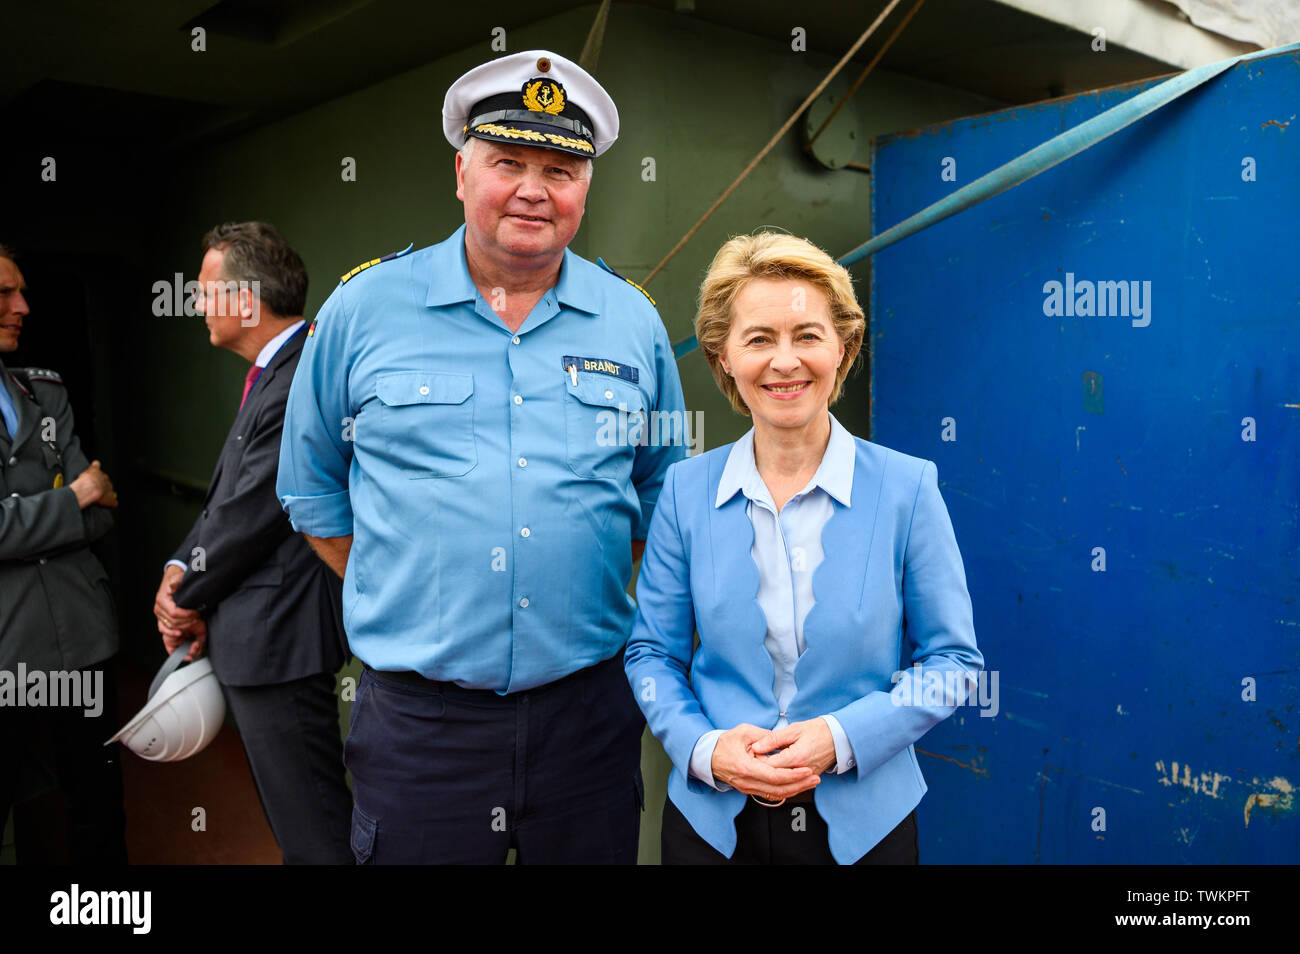 Bremerhaven, Germany. 21st June, 2019. Ursula von der Leyen (CDU), Minister of Defence, and Nils Brandt, Commander of the Gorch Fock, stand together for a photo on the naval training ship 'Gorch Fock'. The naval training ship 'Gorch Fock' was launched in Bremerhaven after more than three years in the dock again. Credit: Mohssen Assanimoghaddam/dpa/Alamy Live News Stock Photo